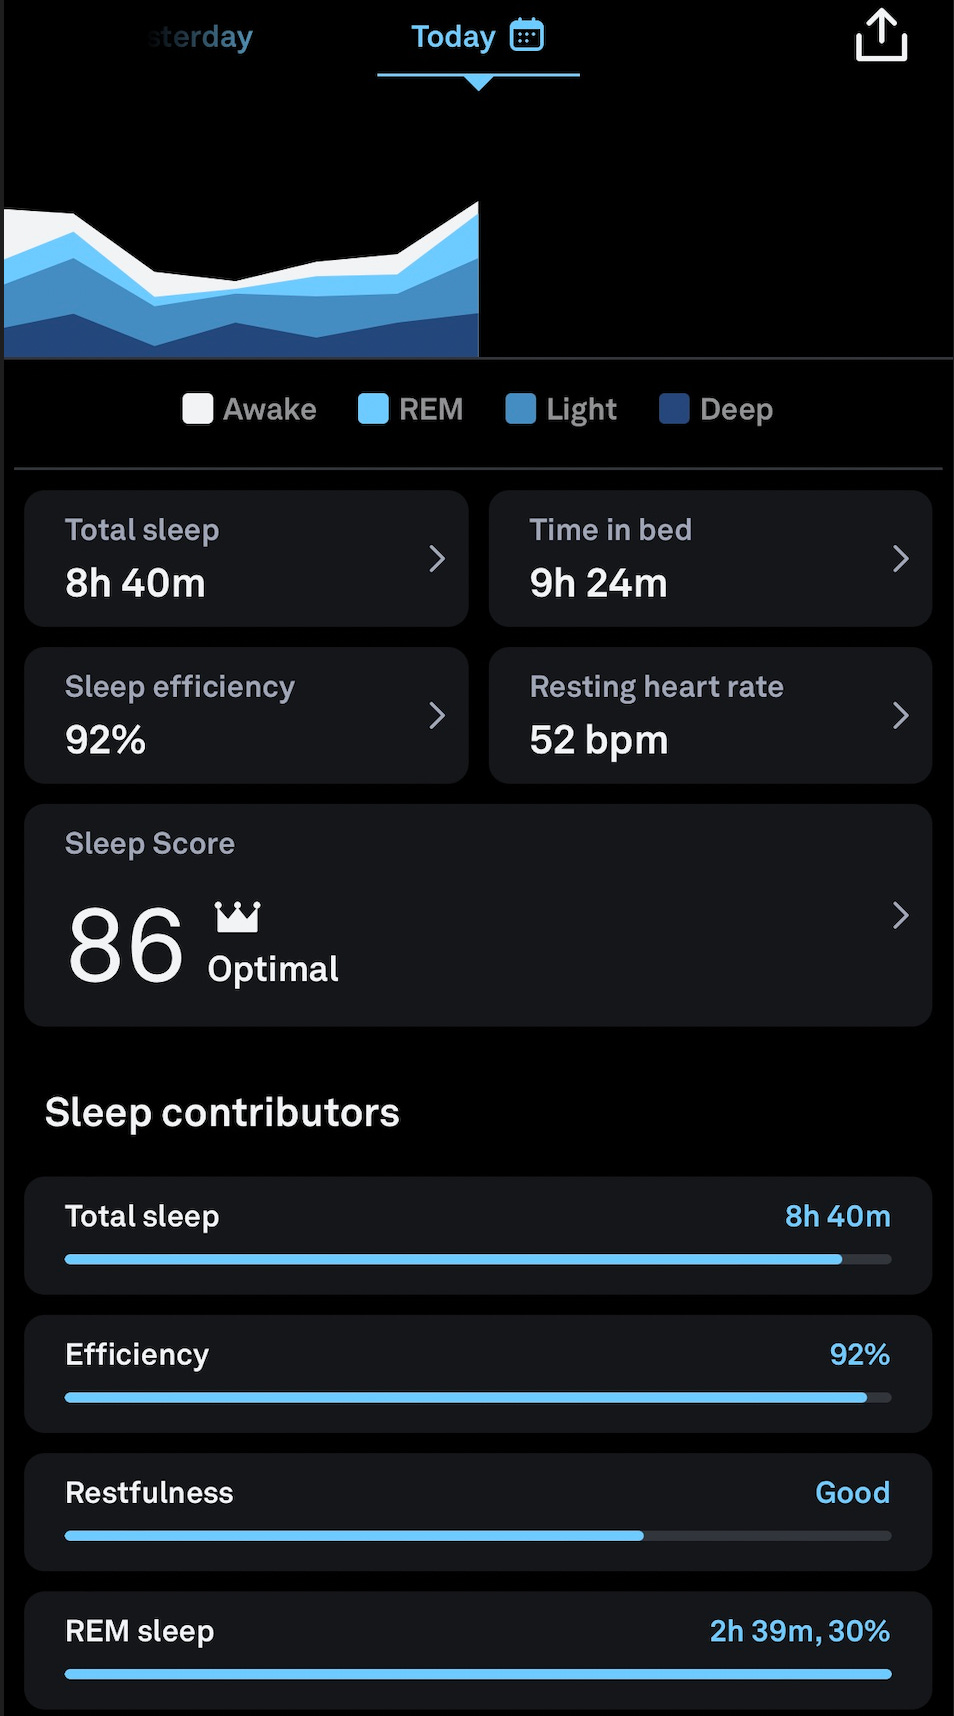 Screenshot from the Oura app showing my sleep data over time. This was me self-correcting after days of poor sleep!